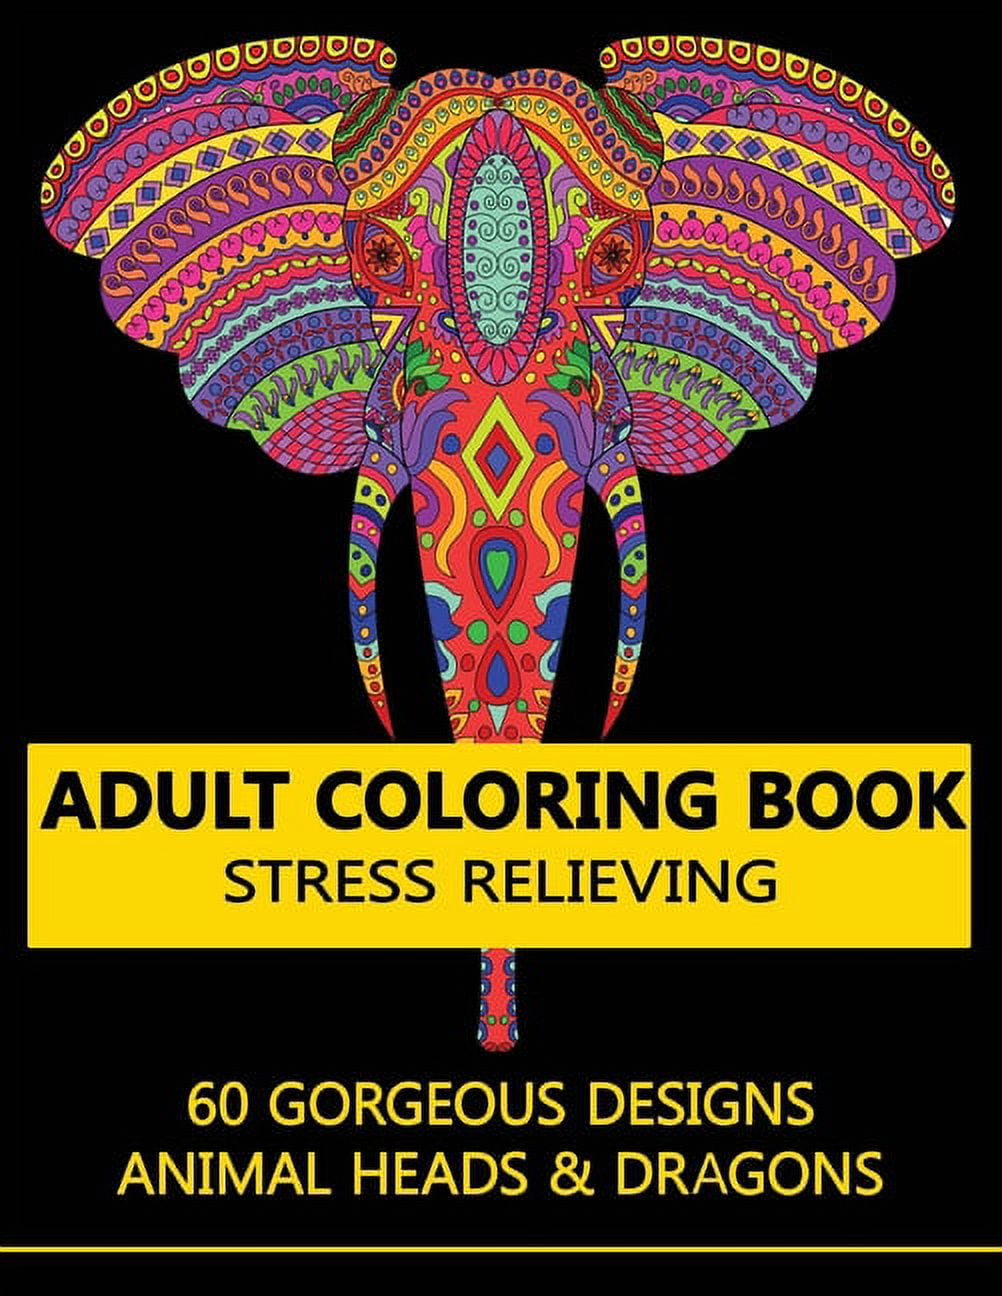 Thai Art Yaksa Coloring Book: Adult Coloring Book Stress Relieving  Patterns. Beautiful illustration Design on Thailand Mythical and fantasy  ,God